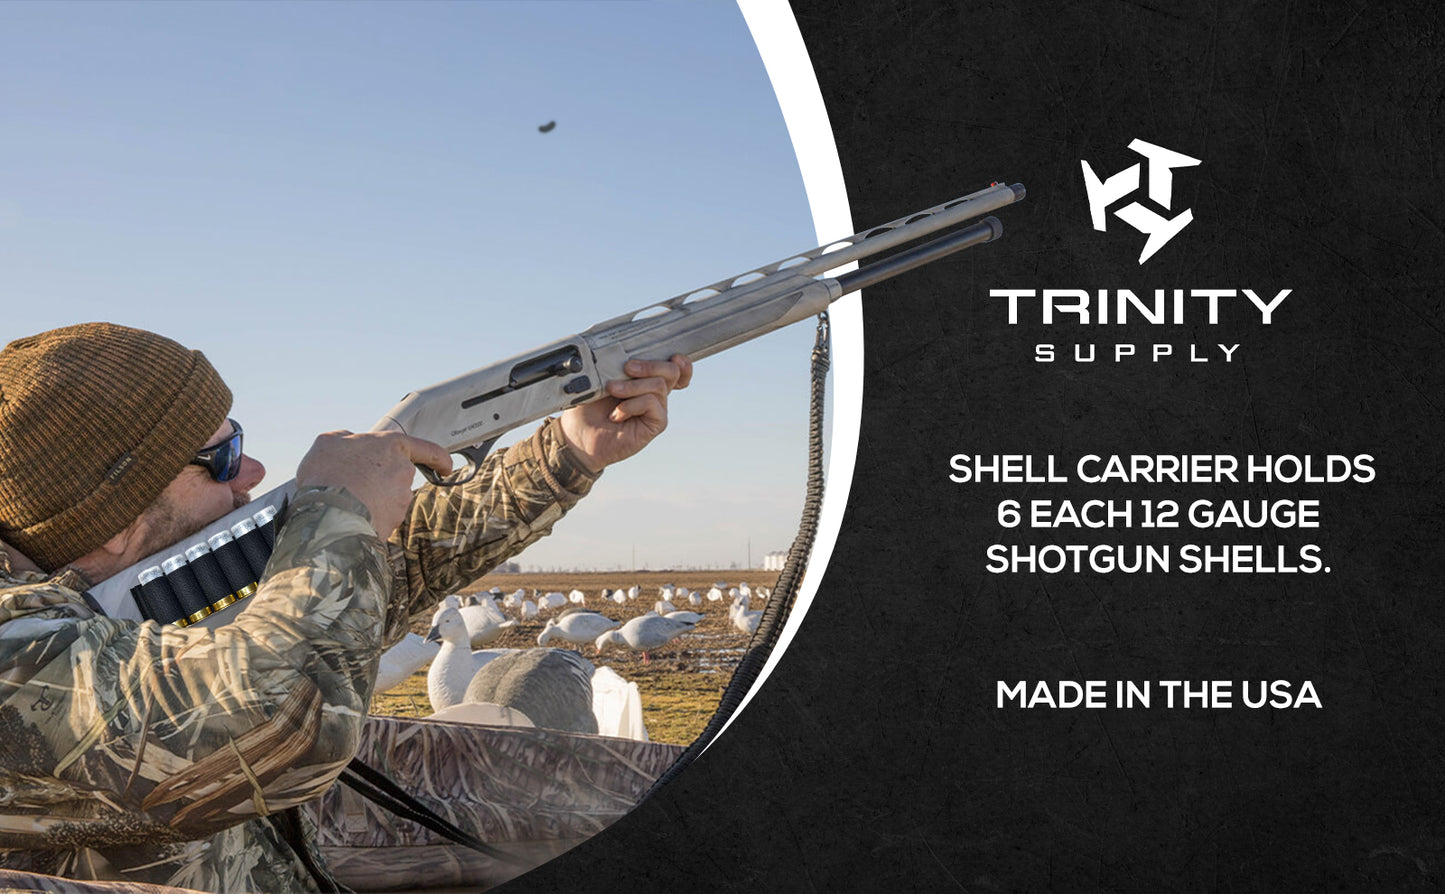 Trinity Shell Holder for Mossberg 930 Shells Carrier Hunting Accessory Holder 12 Gauge Tactical Shell Pouch Ammo Shell Round slug Carrier Reload Adapter Target Range Gear.